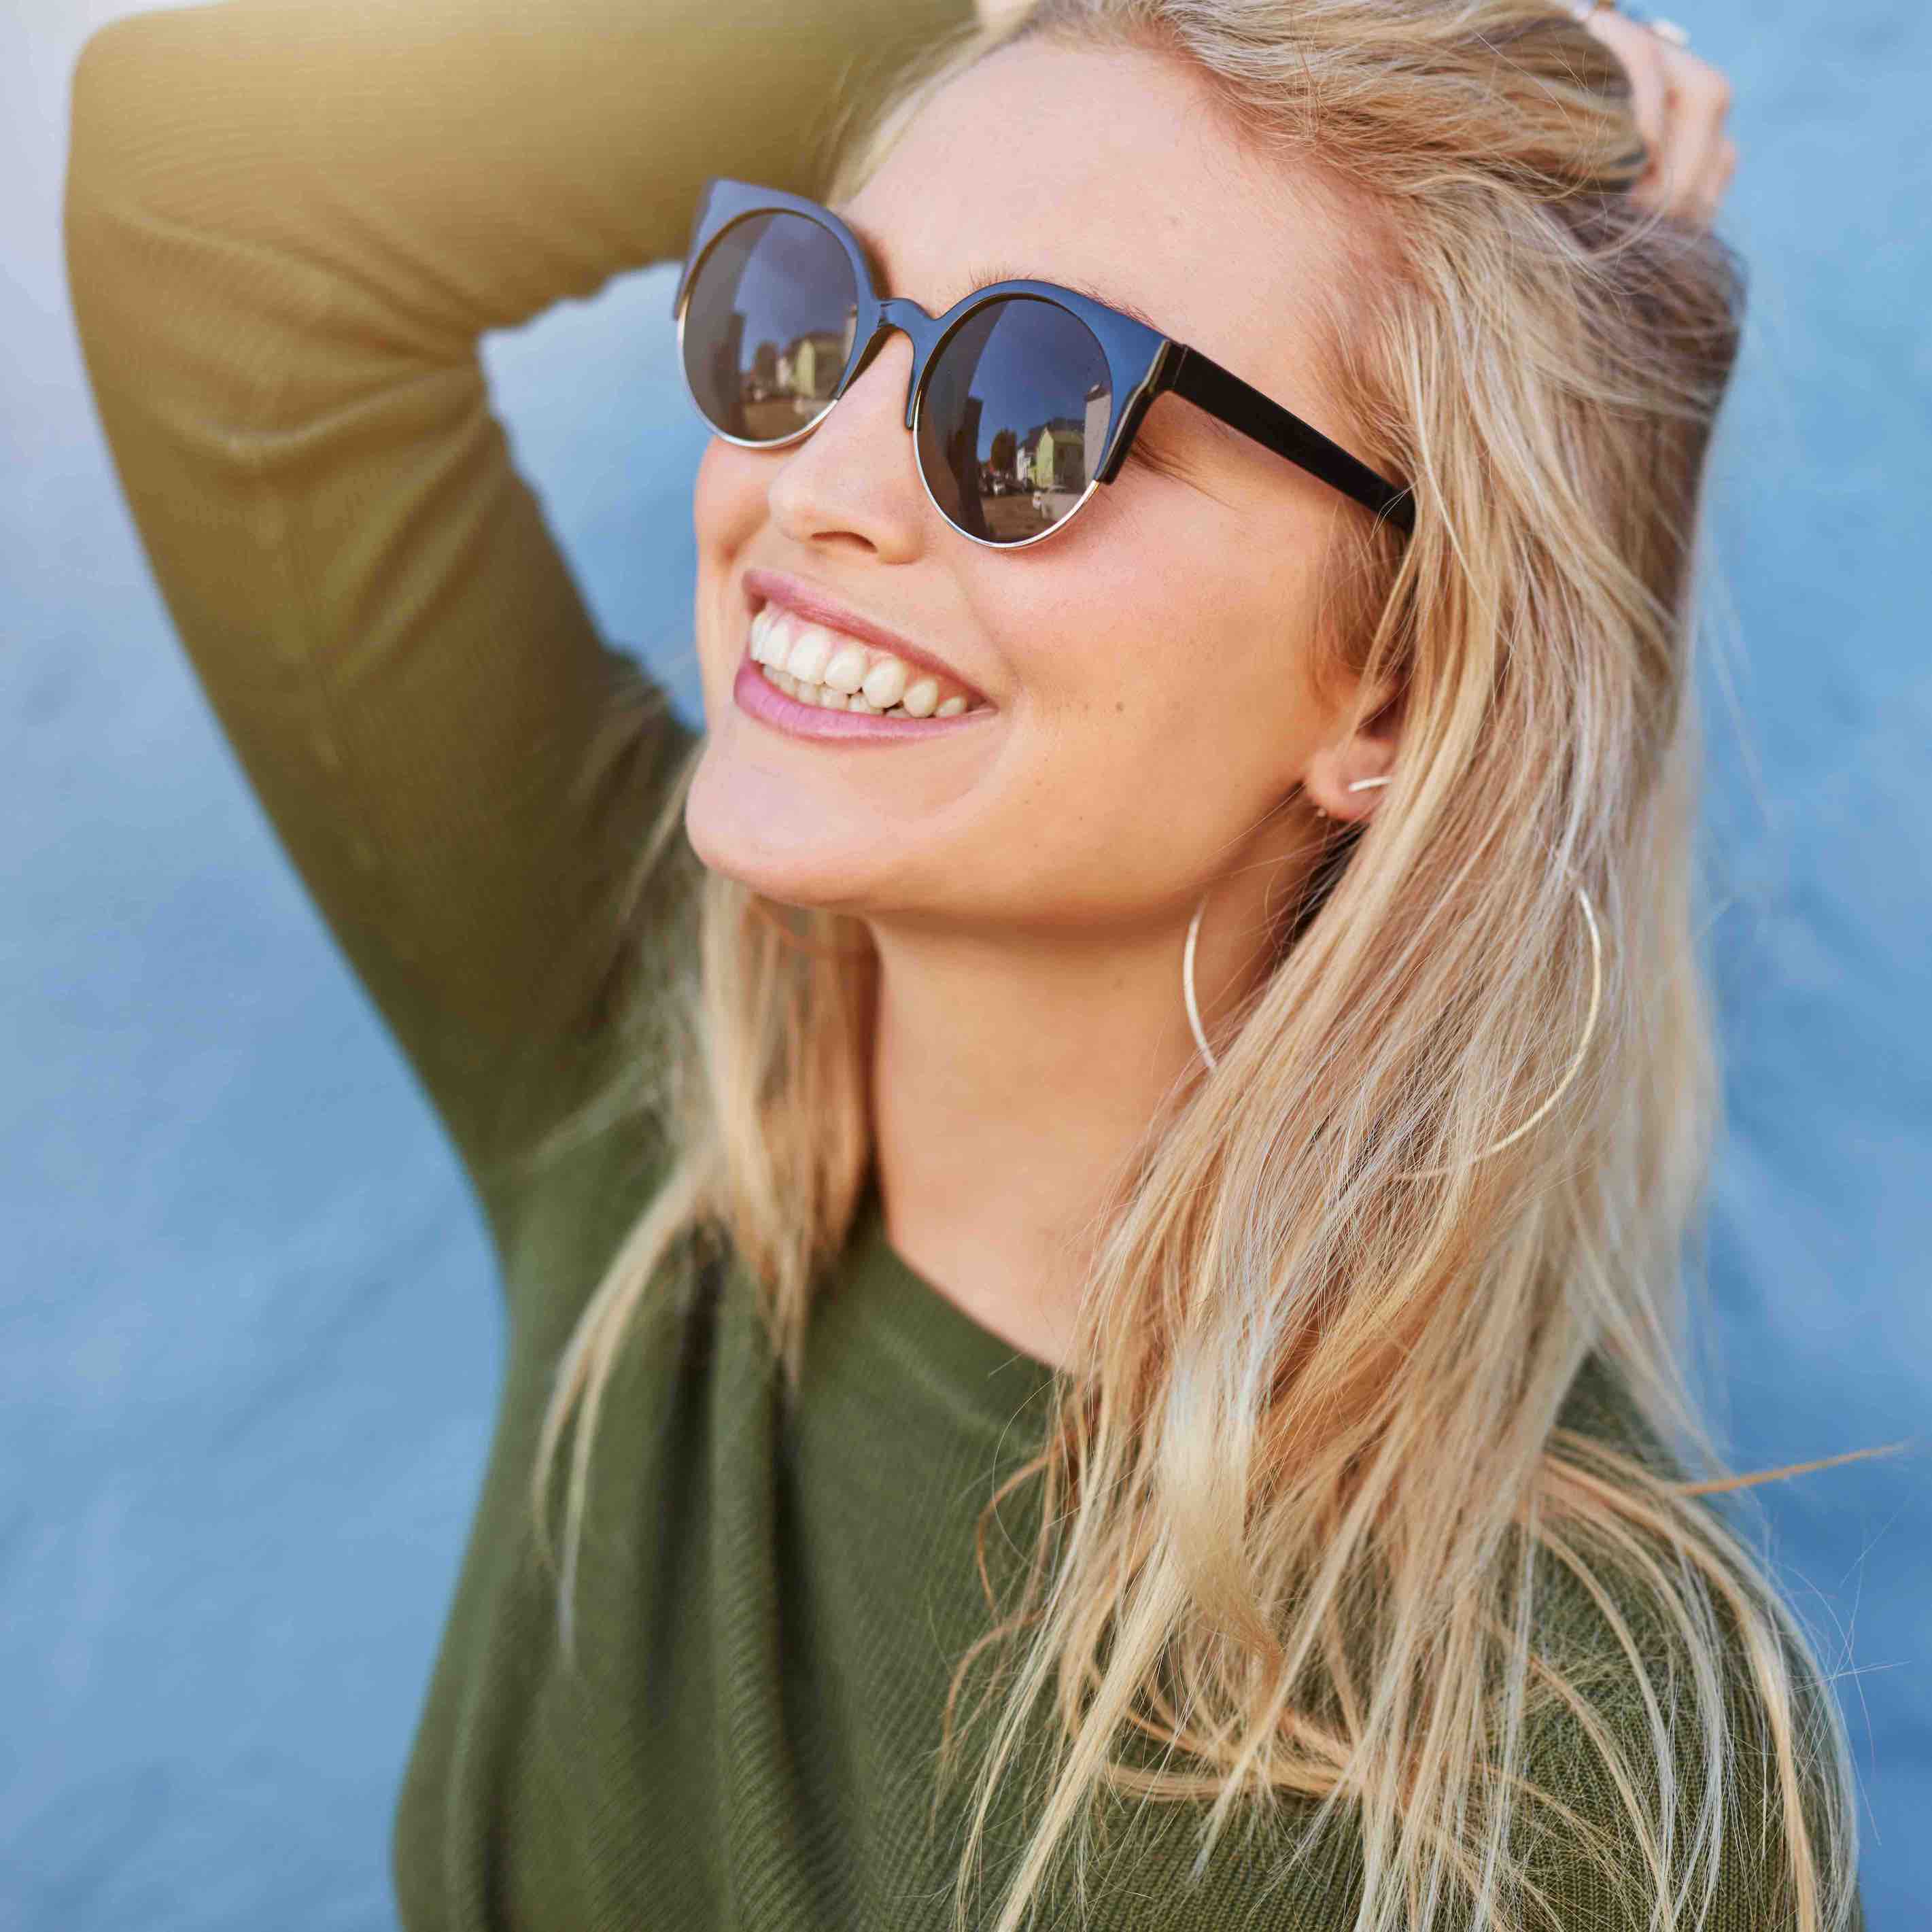 Woman in sunglasses smiling